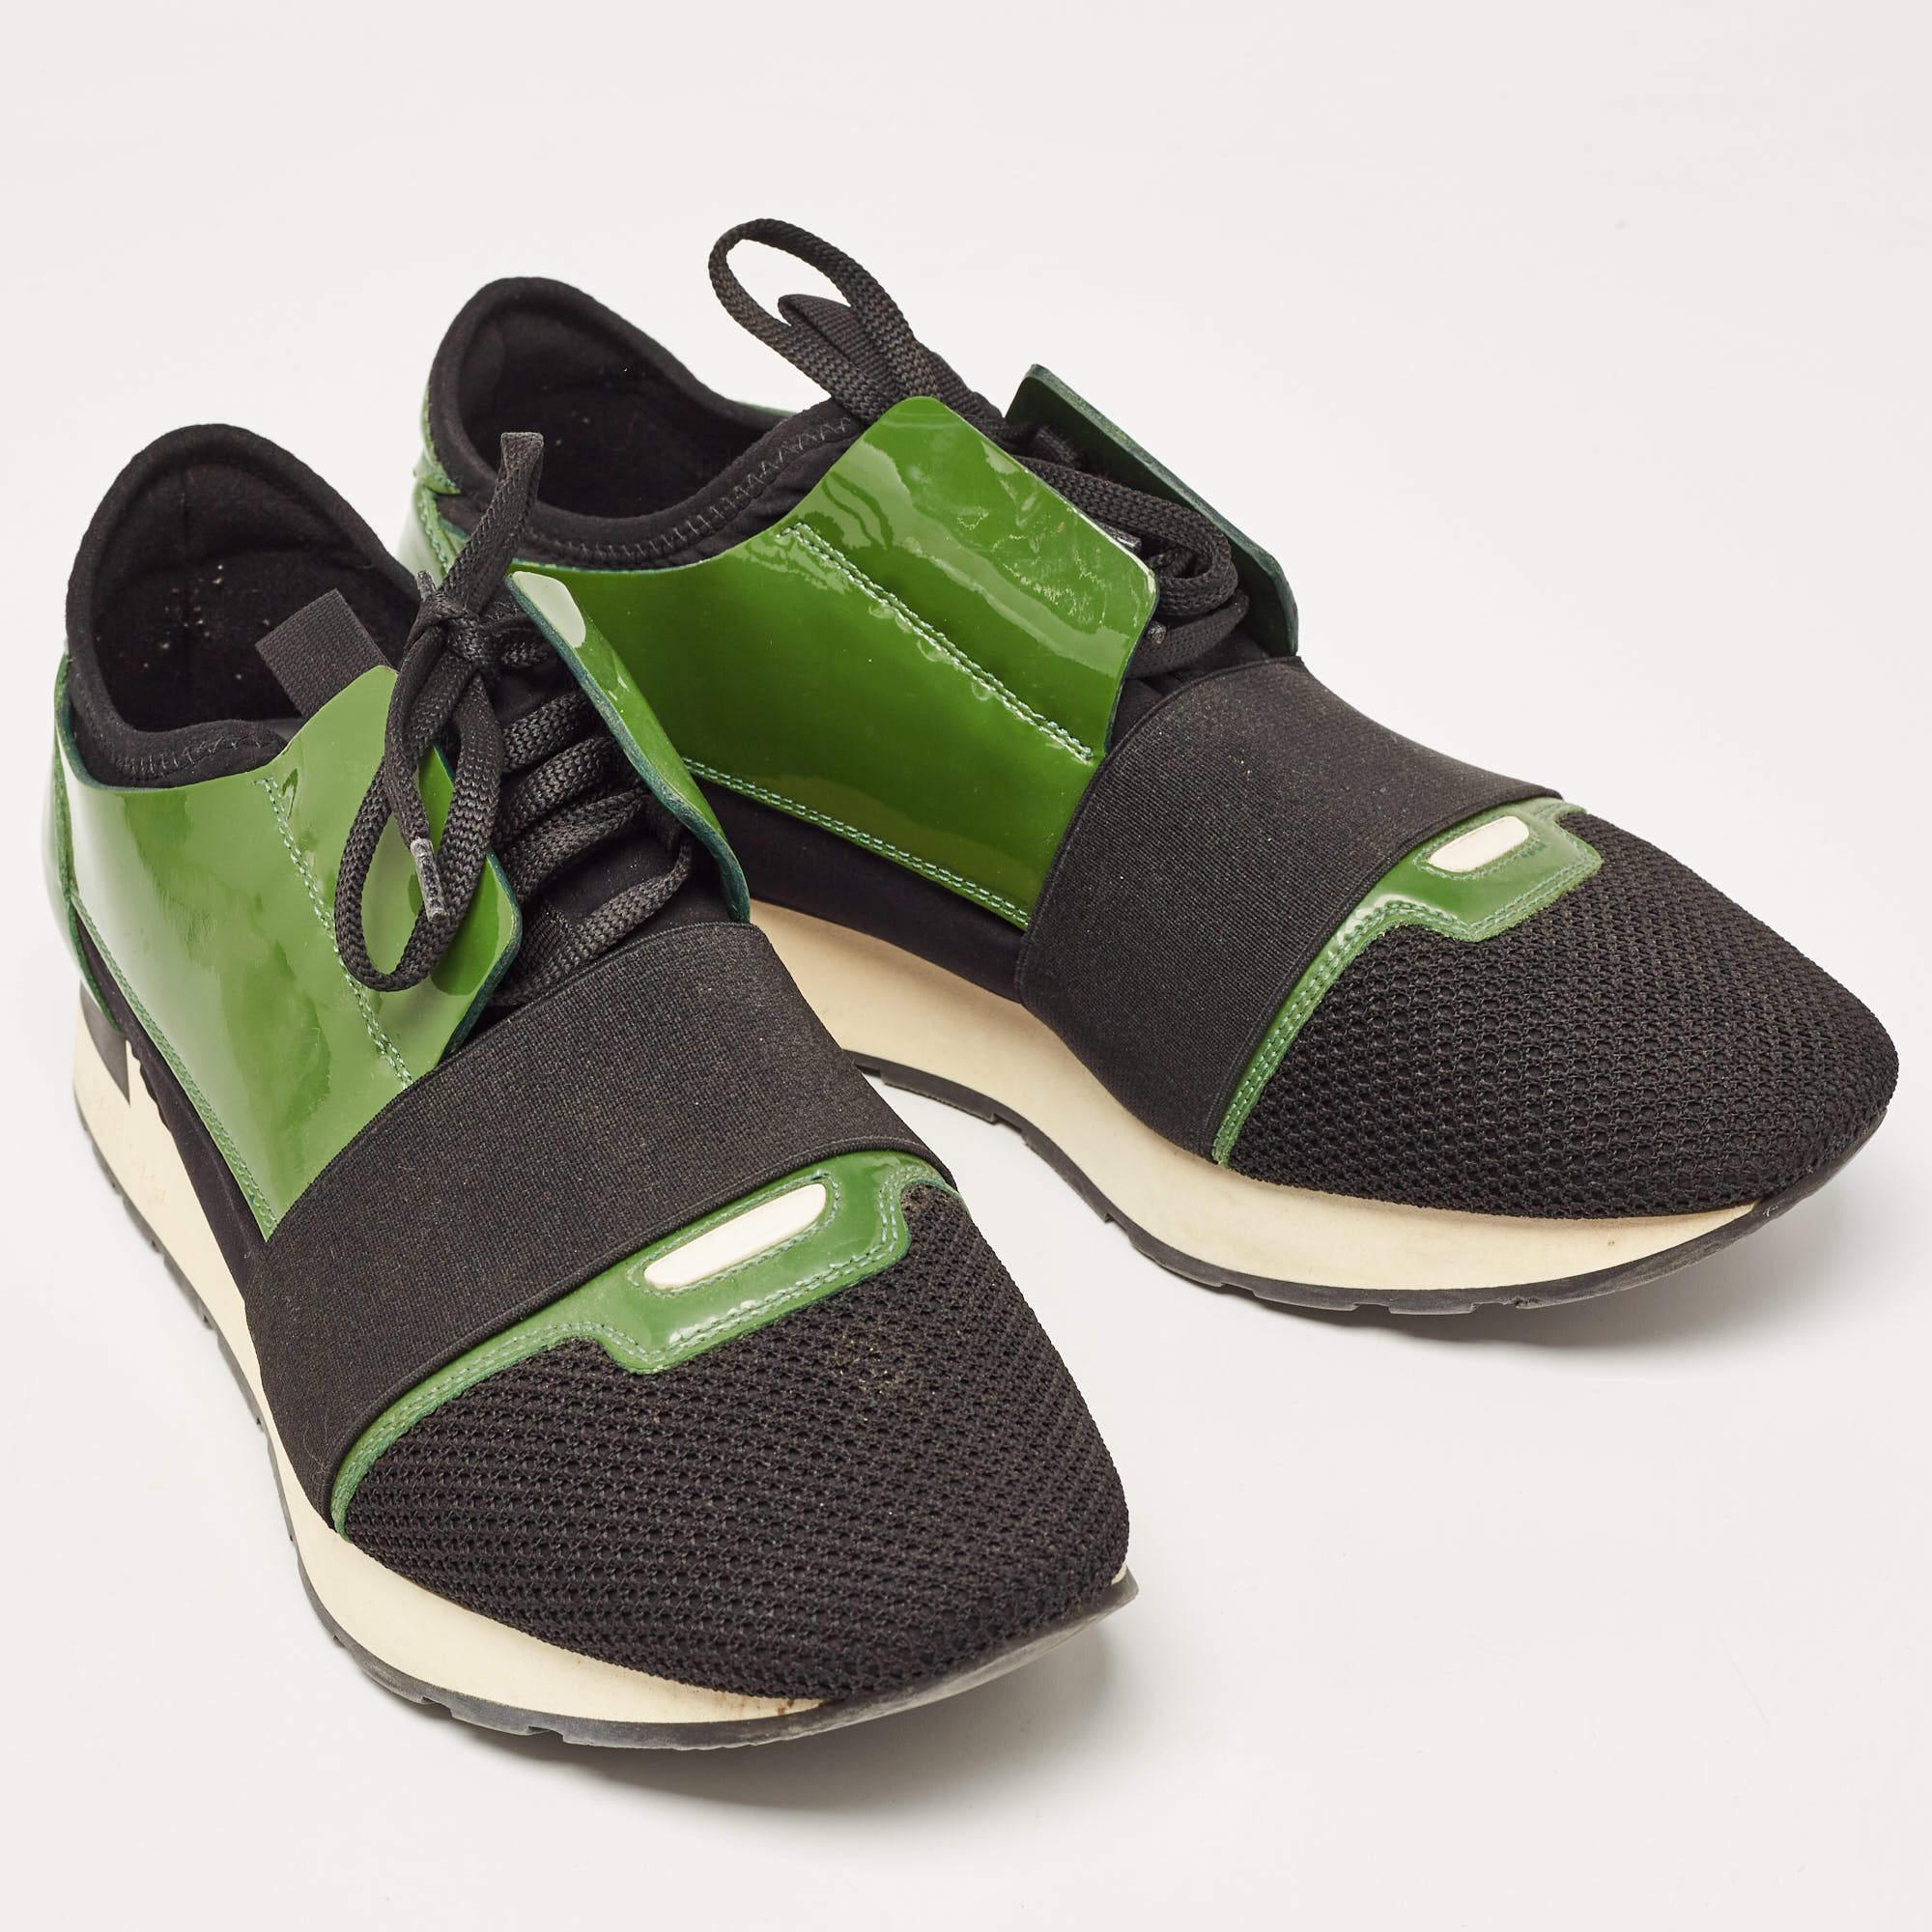 Balenciaga Green/Black Patent Leather and Mesh Race Runner Sneakers Size 41 In Good Condition For Sale In Dubai, Al Qouz 2